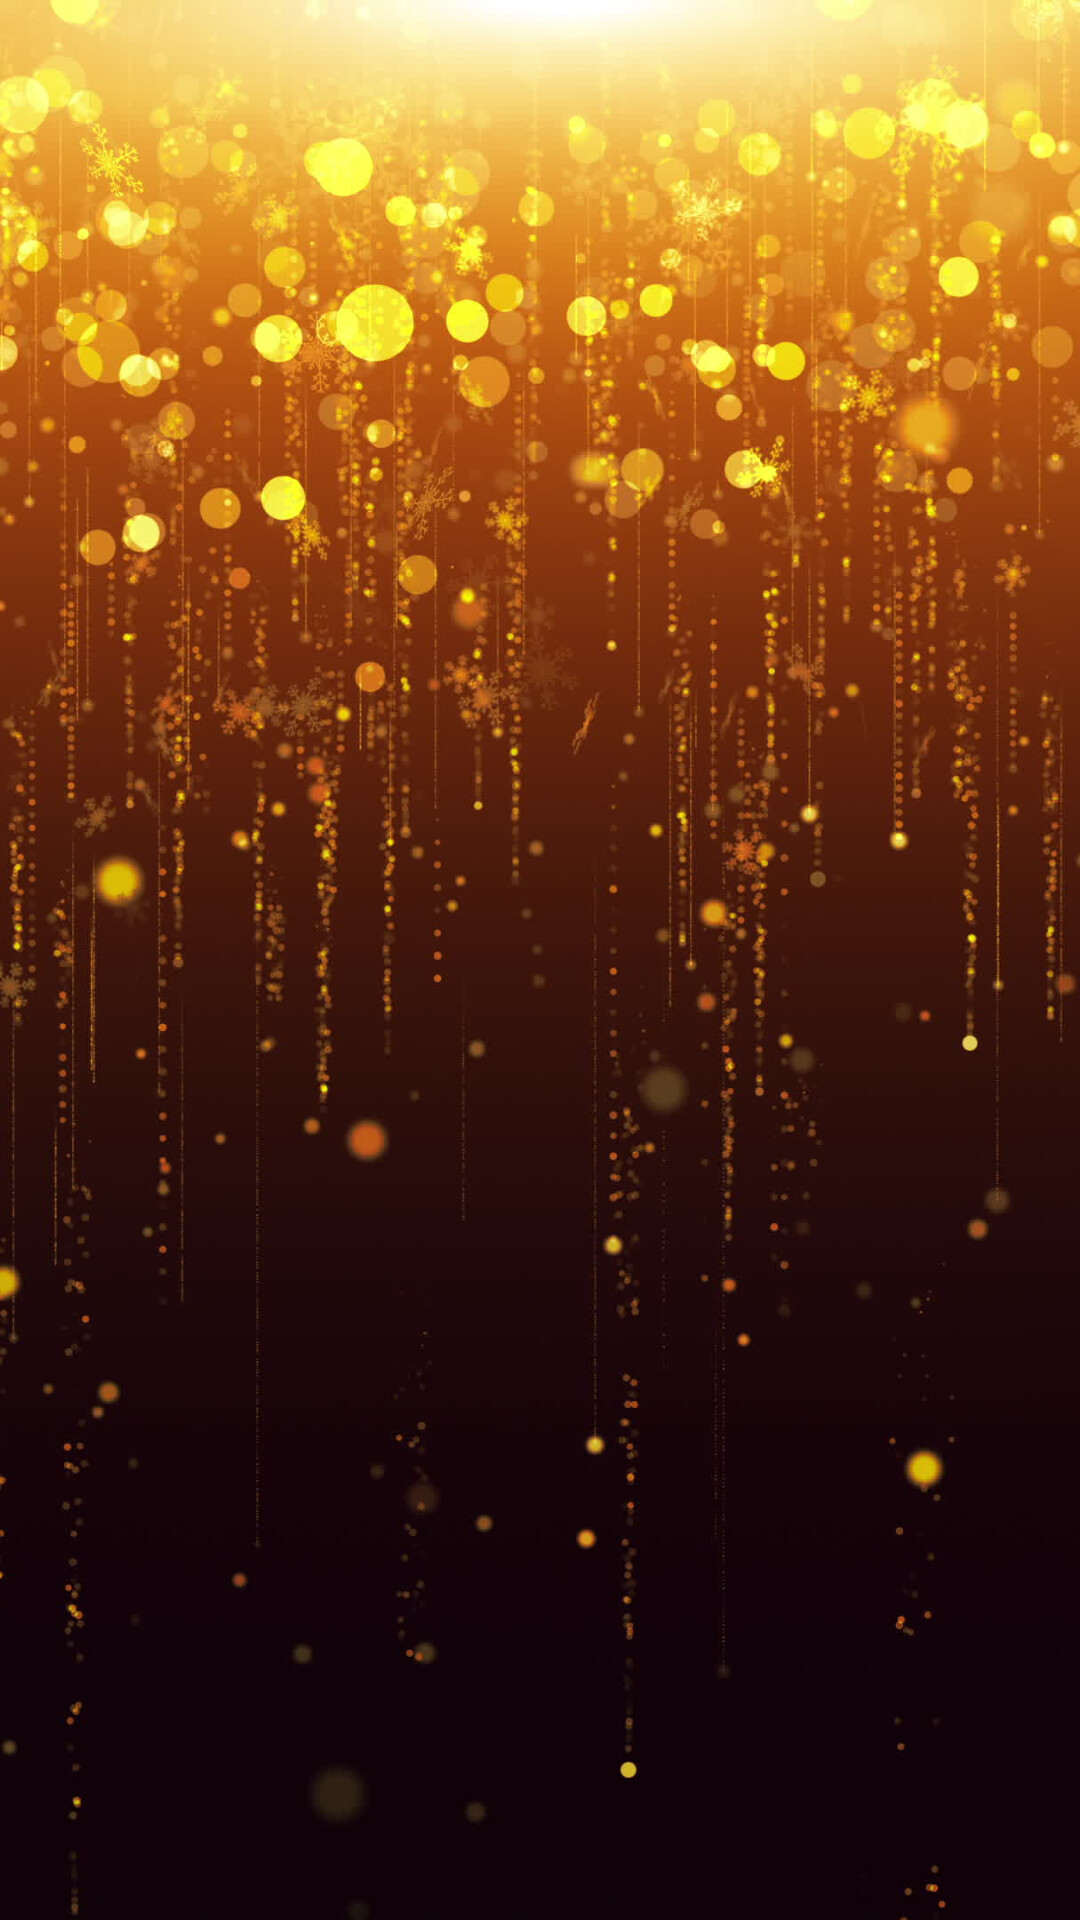 Gold Sparkle: Colorful holiday lights, Sparkling golden threads, Hanging Christmas tree ornaments. 1080x1920 Full HD Background.